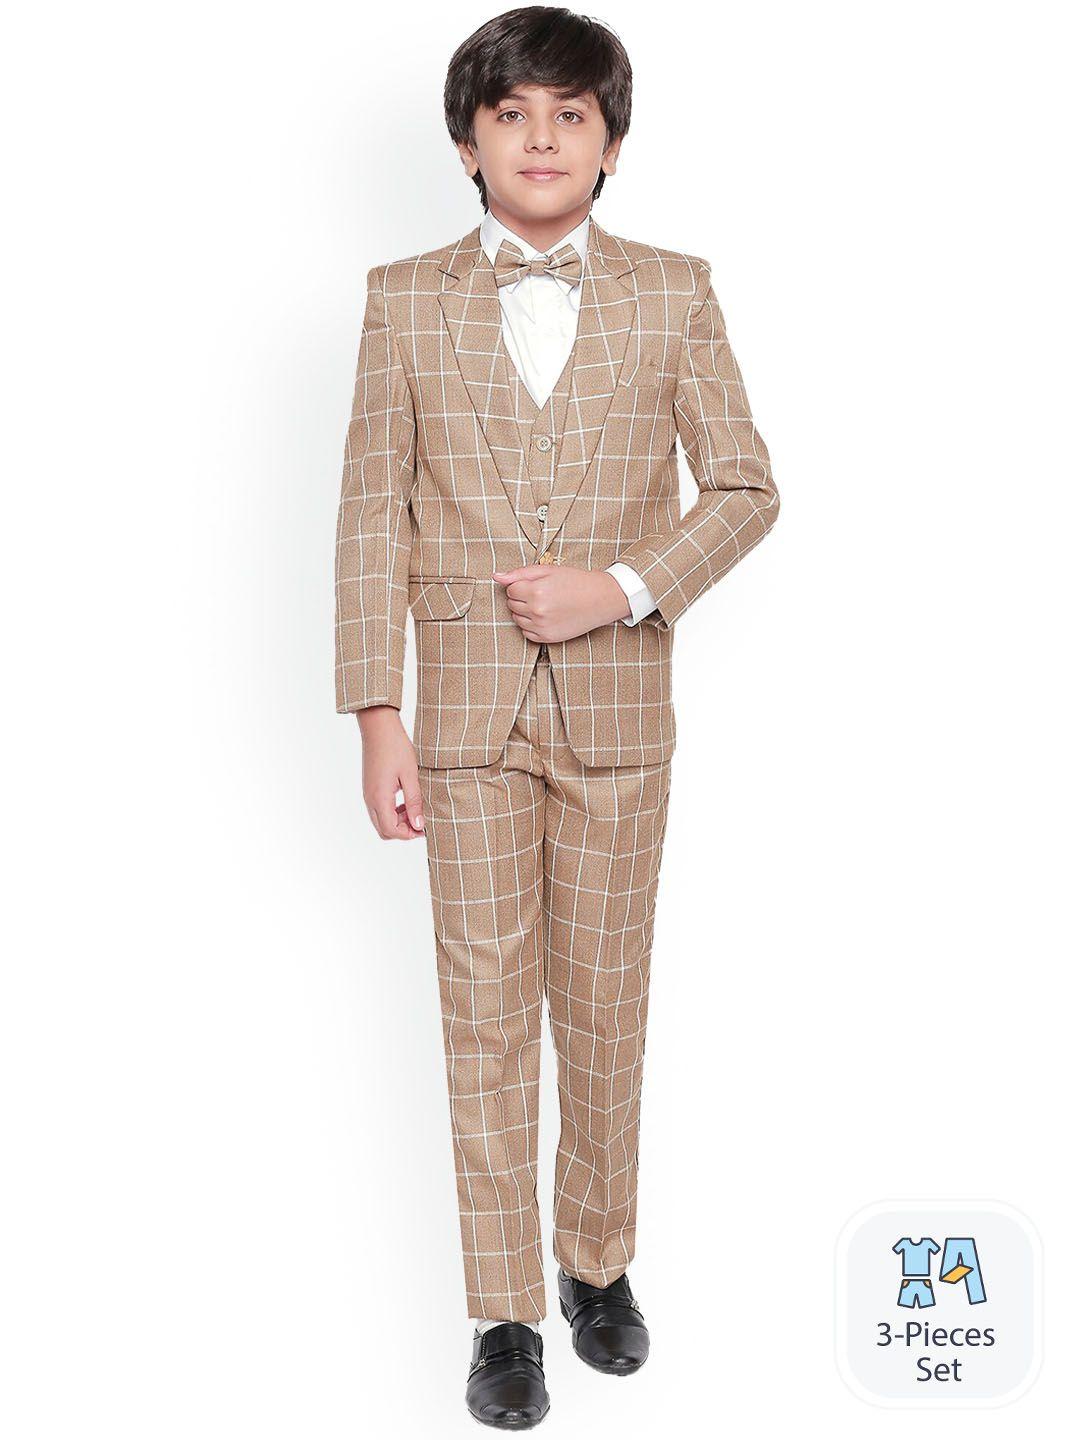 baesd boys single-breasted 5-piece party suit